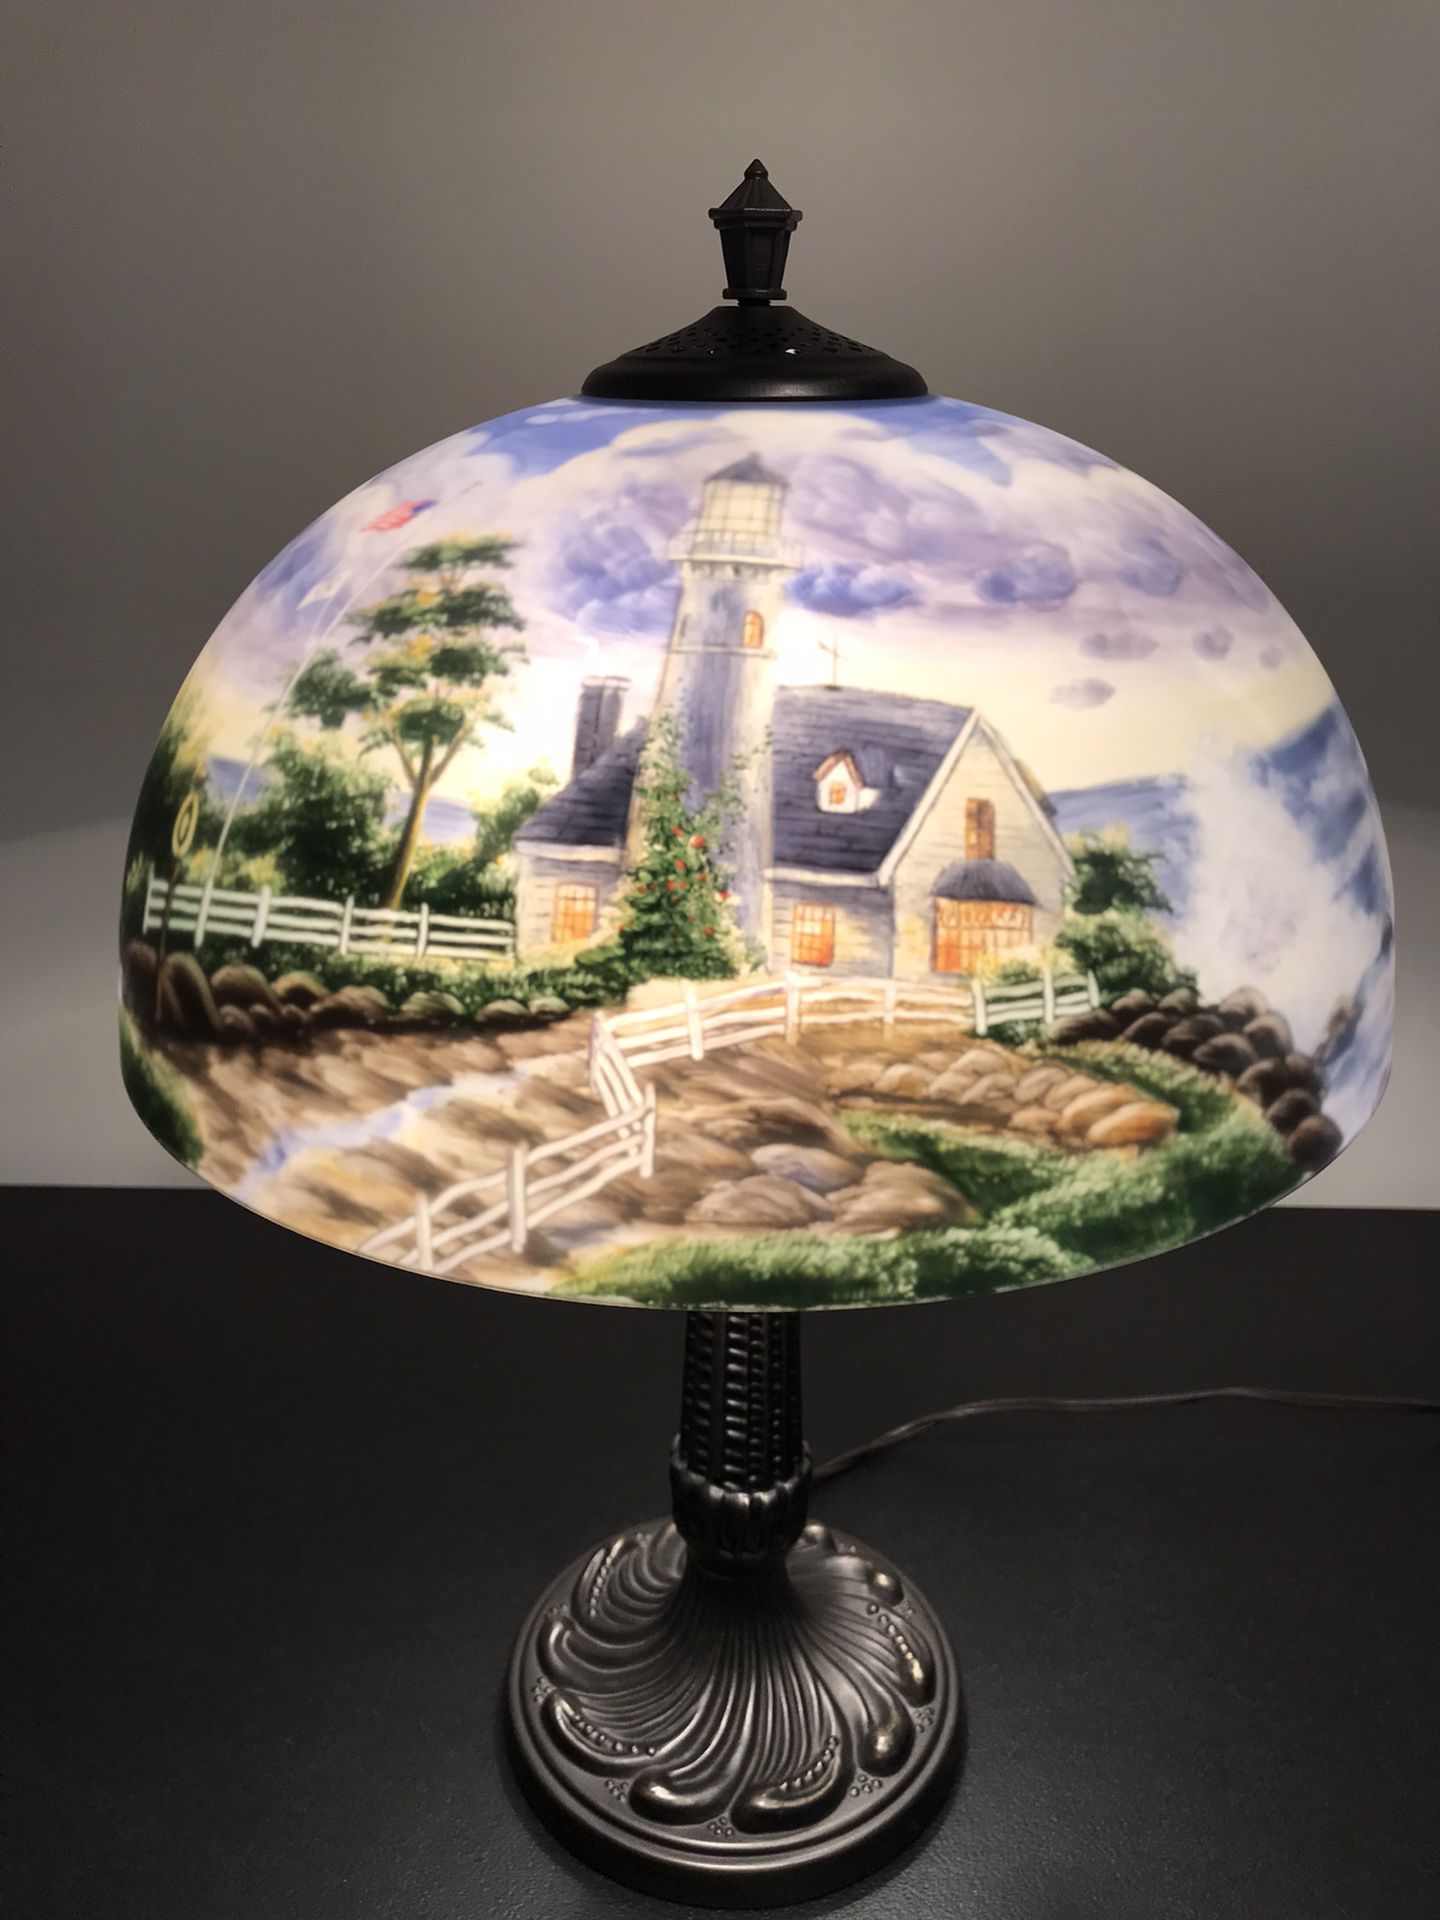 Authentic Thomas Kincaid reverse painted lamp (painting on inside of lamp)